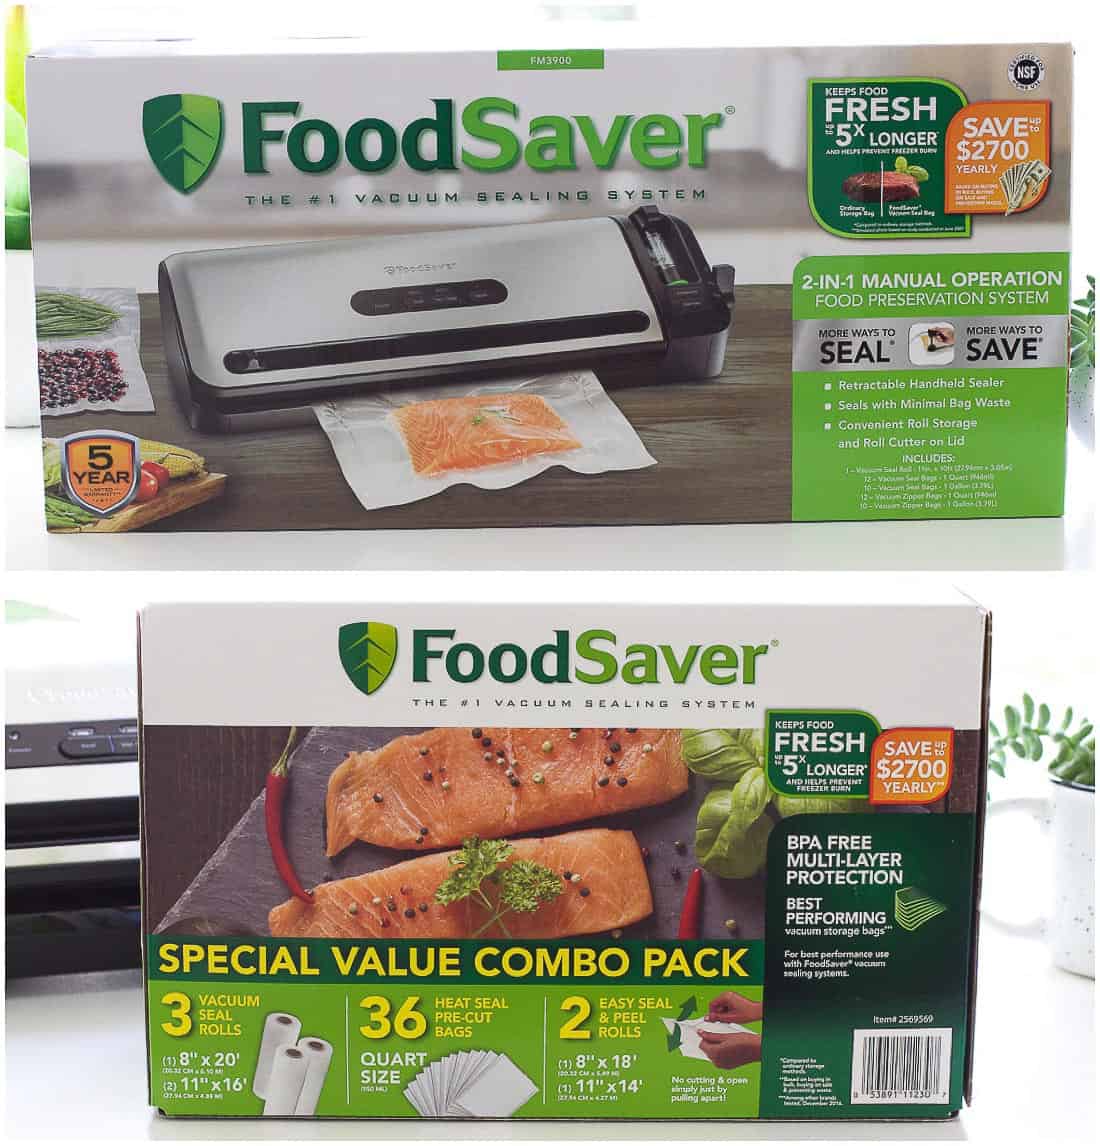 A picture of the boxes of the FoodSaver and the Combo Pack of rolls and bags 